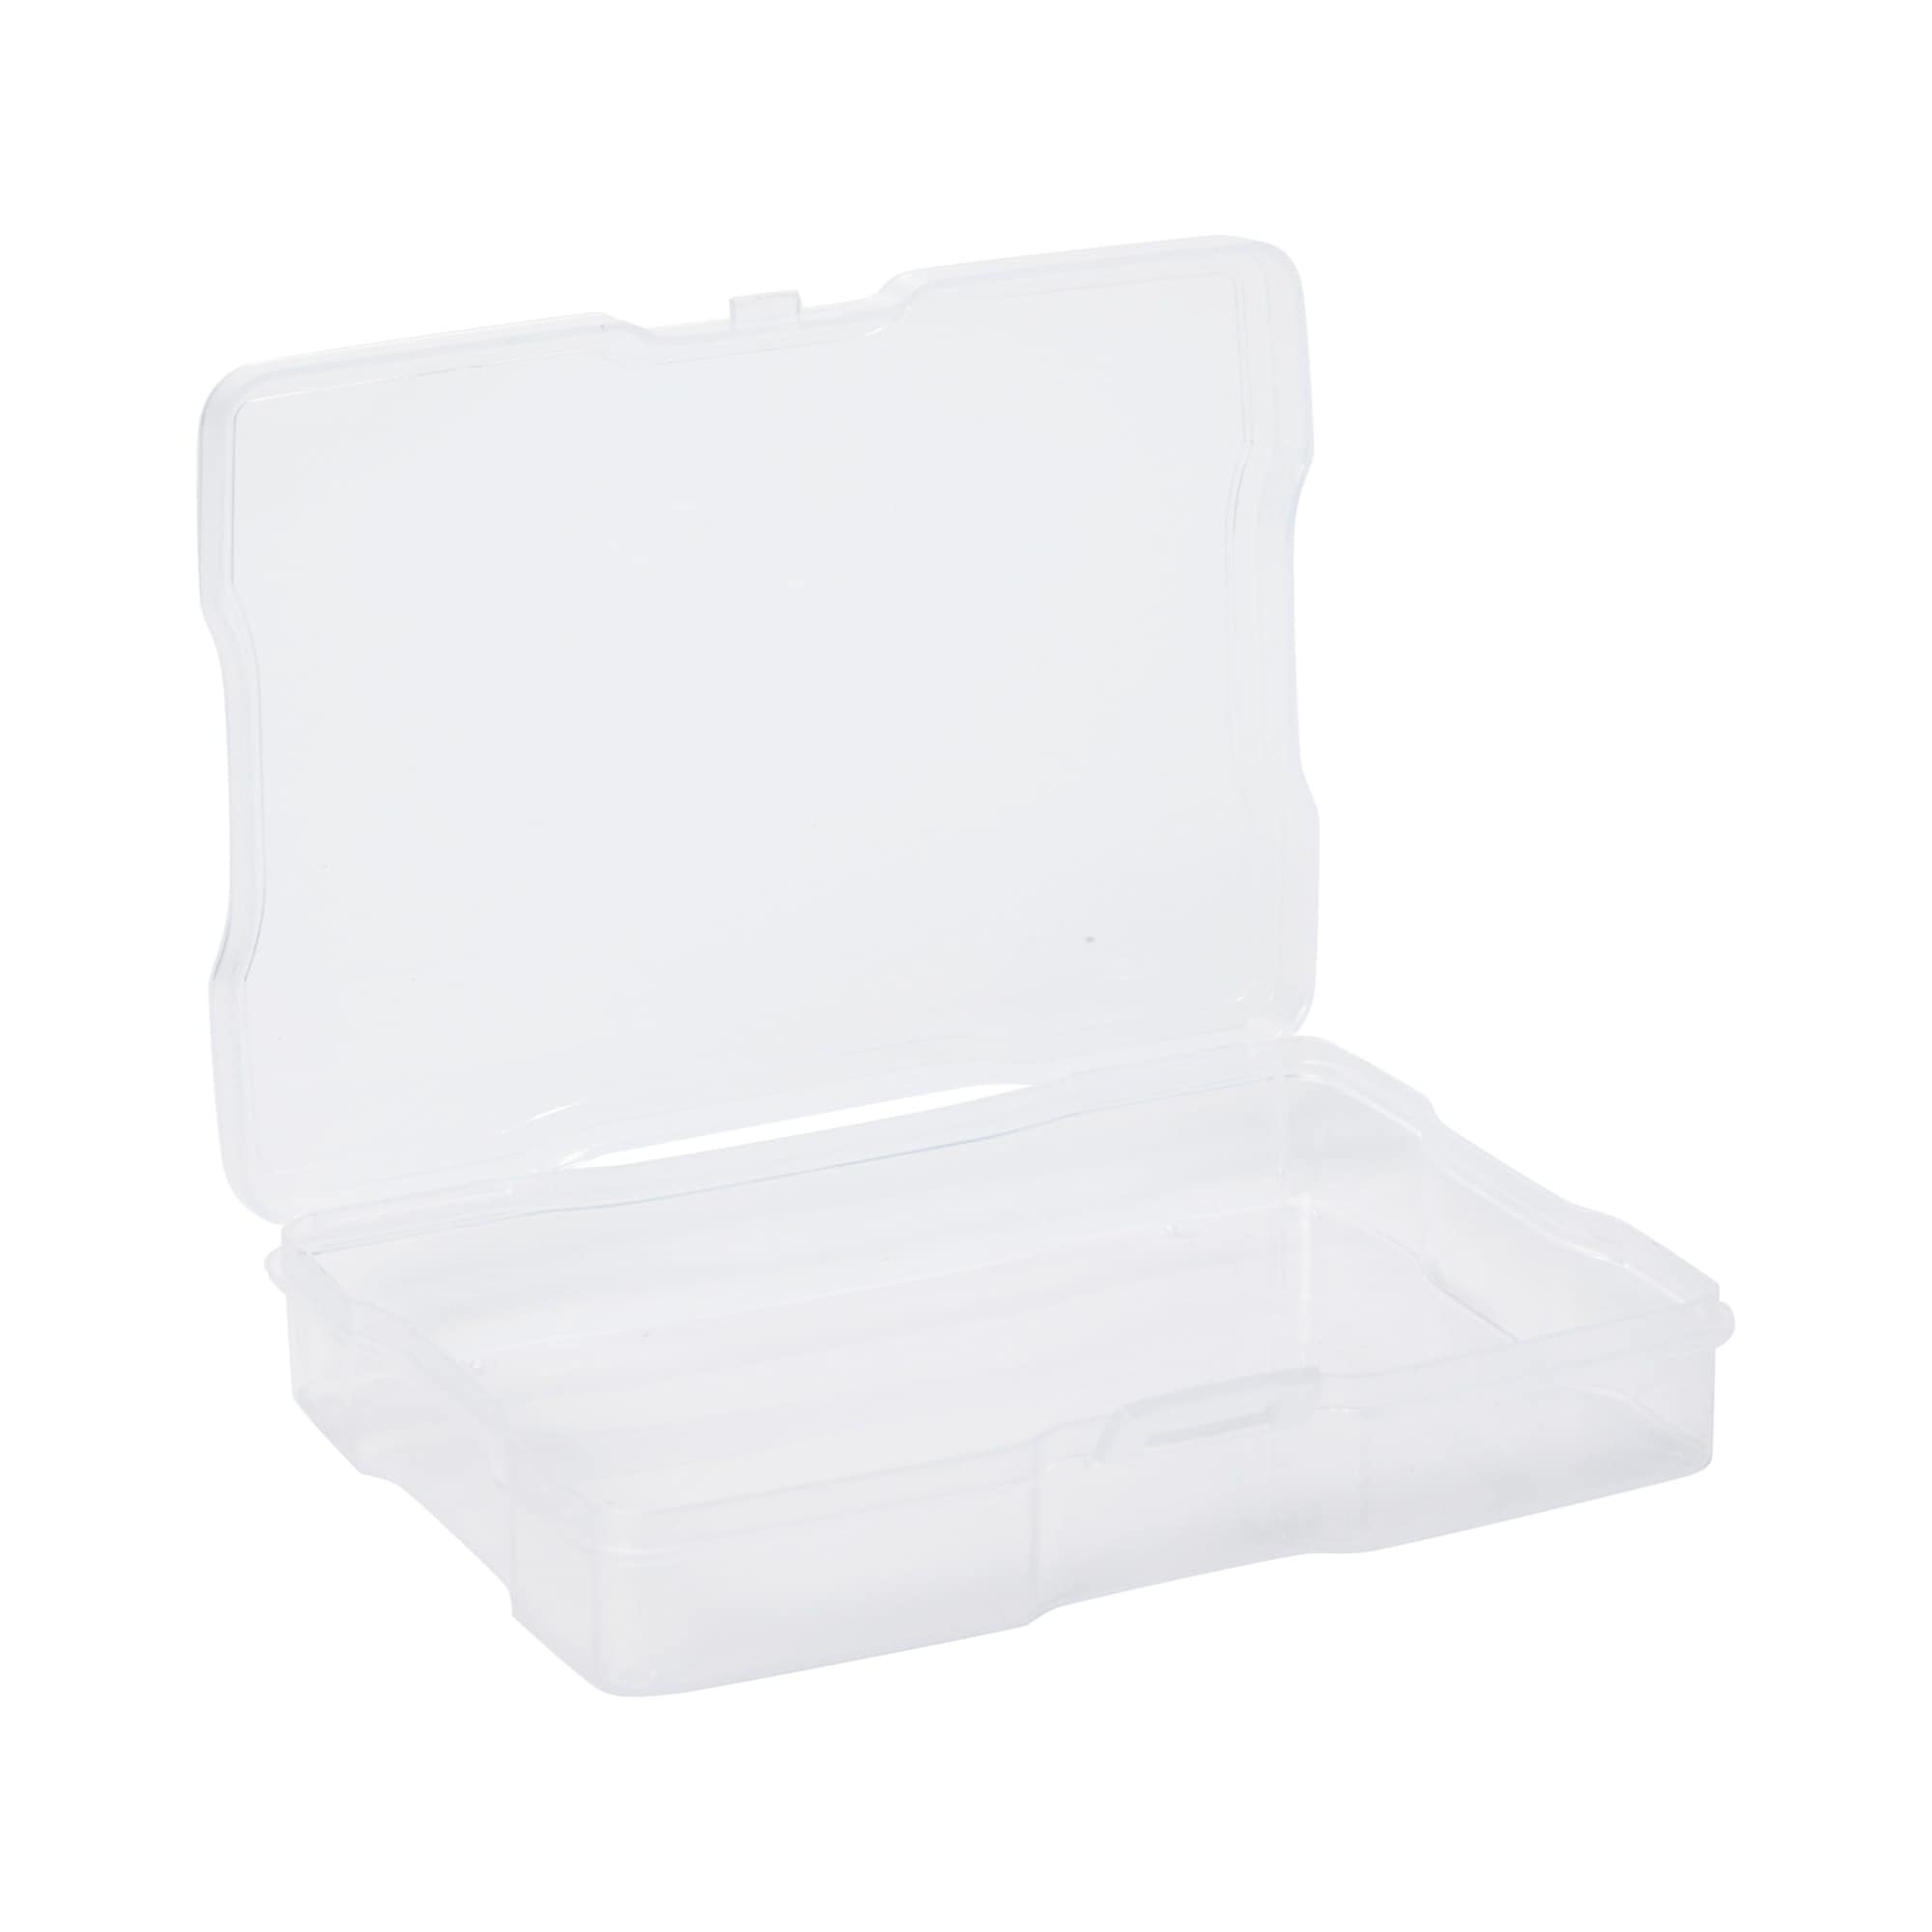 Bright Creations 24 Pcs Photo Storage Boxes for 4x6 Pictures with 40 Blank Labels, Clear Cases & Containers